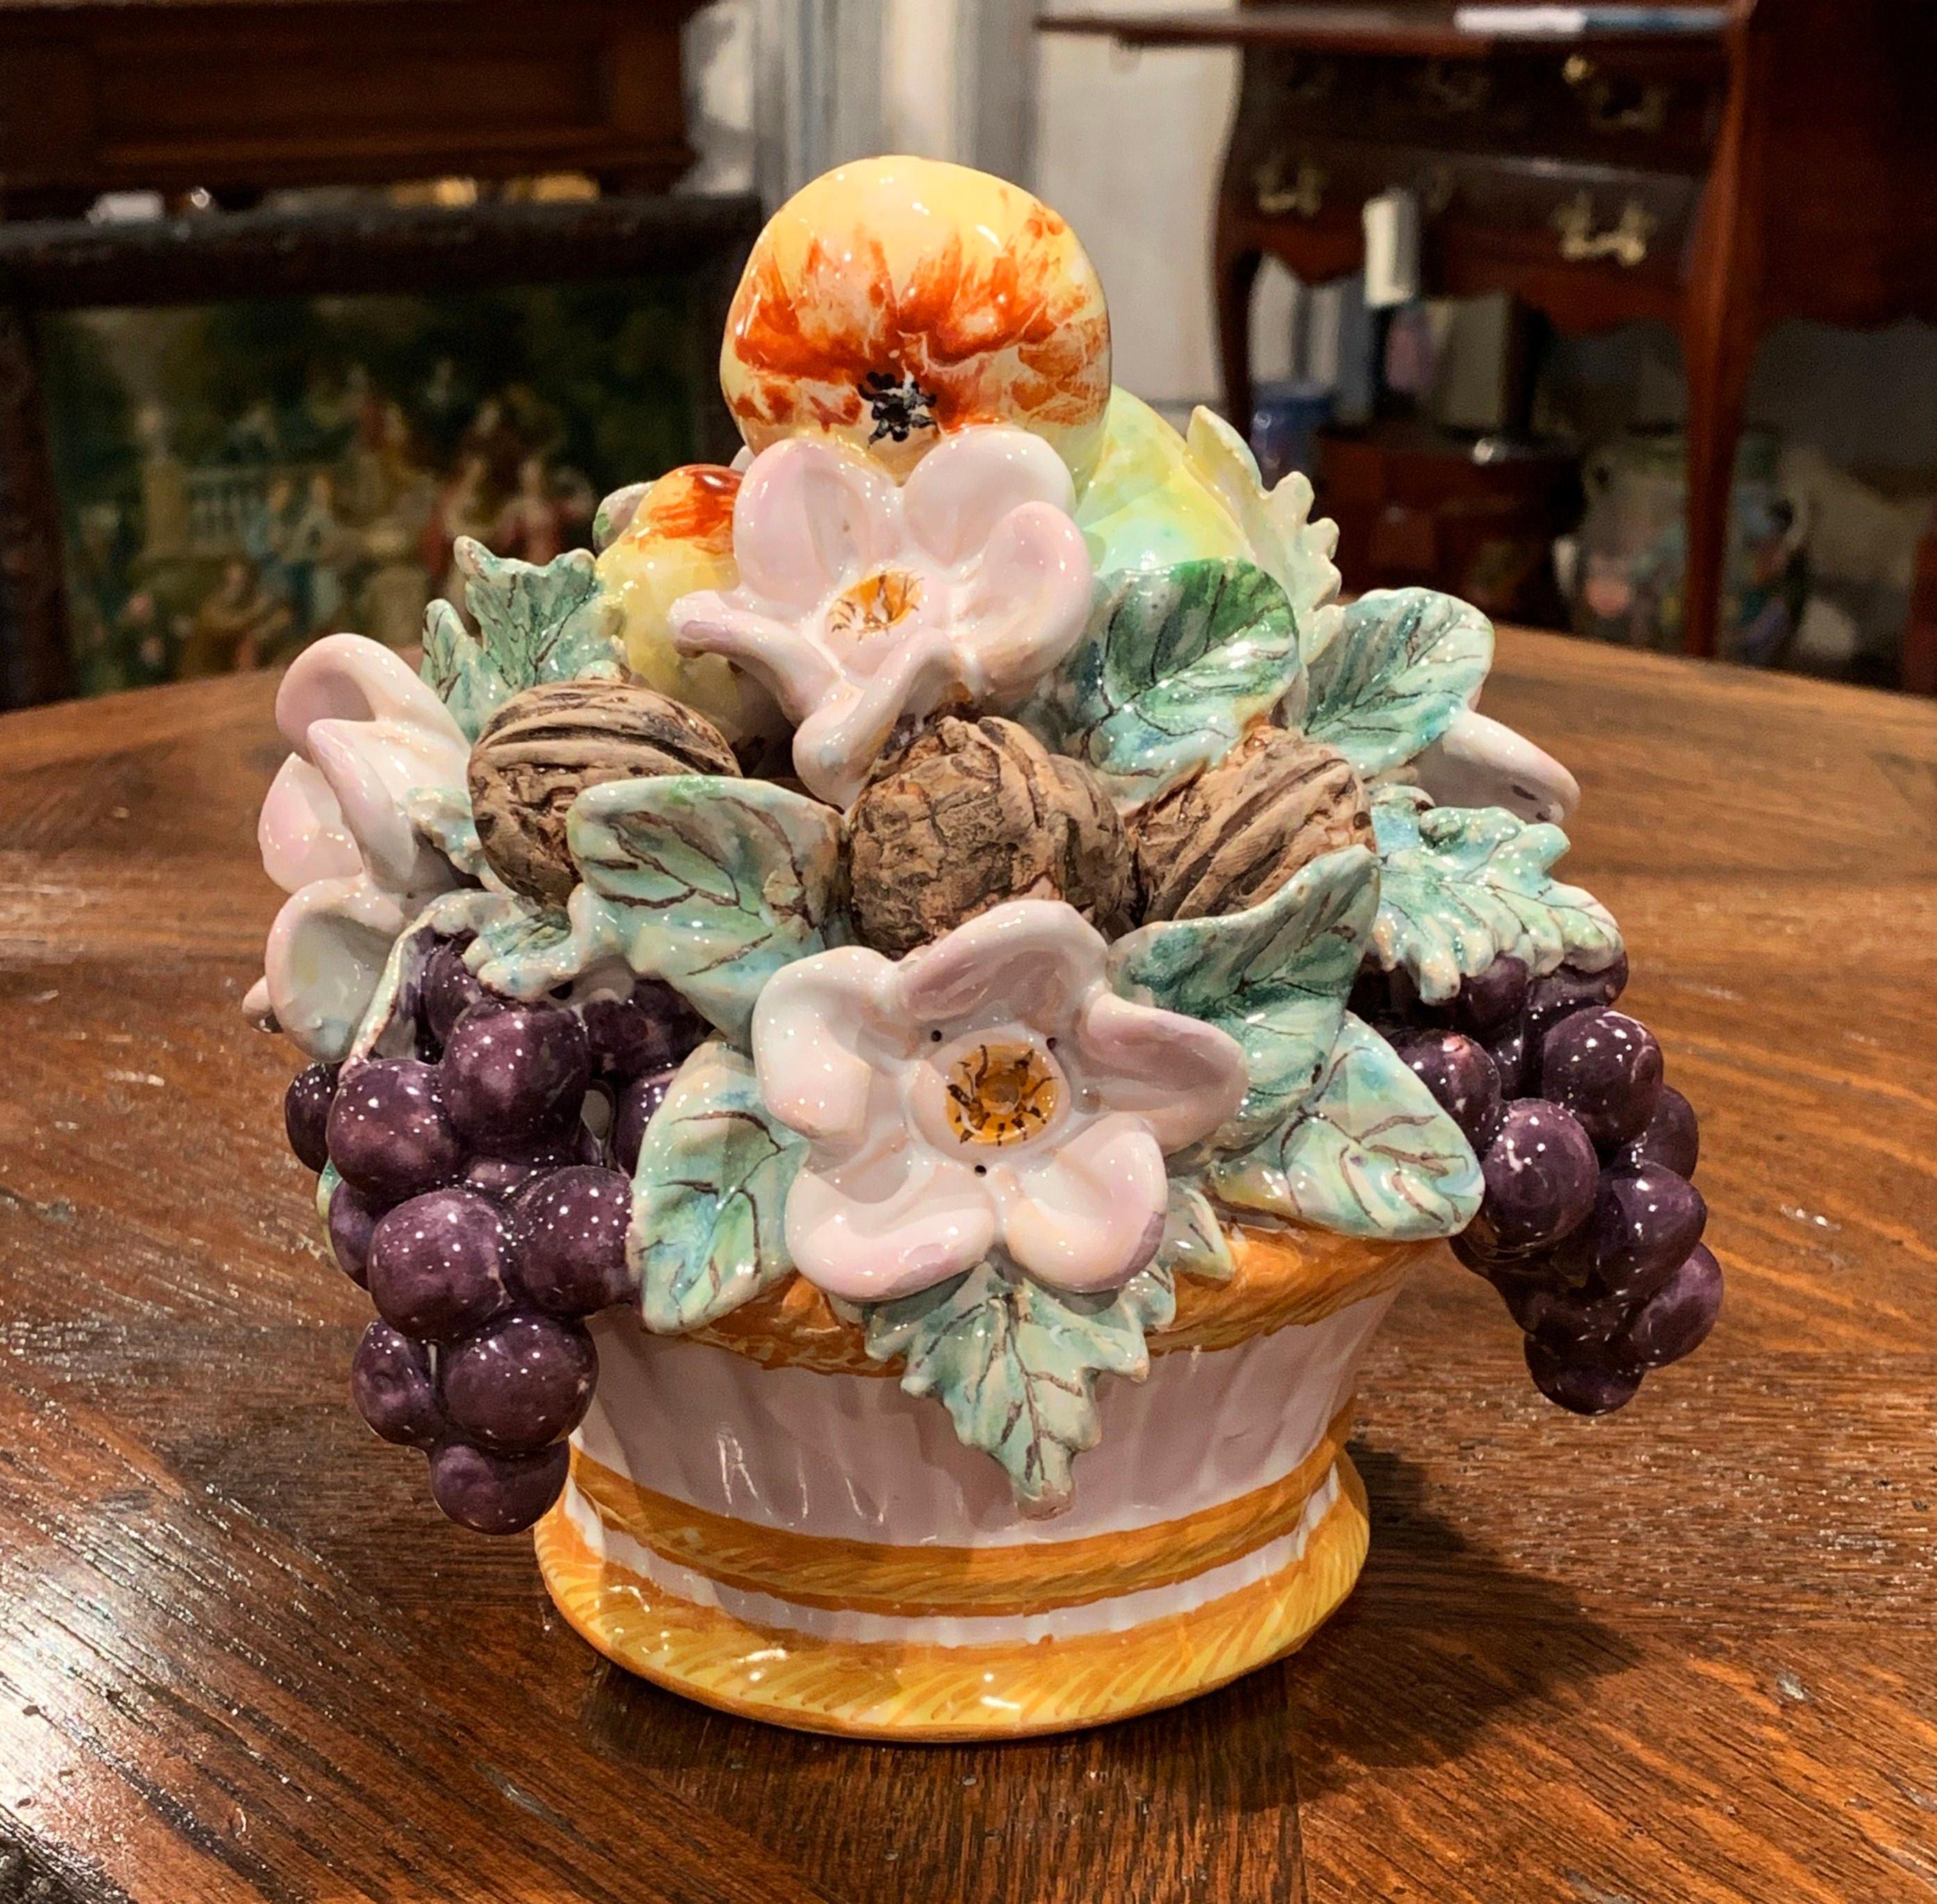 Decorate a tabletop or a chest with this colorful, Majolica basket composition. Crafted in France, circa 1960, the ceramic centerpiece features a realistic assortment of fruits and flowers in high relief set inside a white basket decorated with